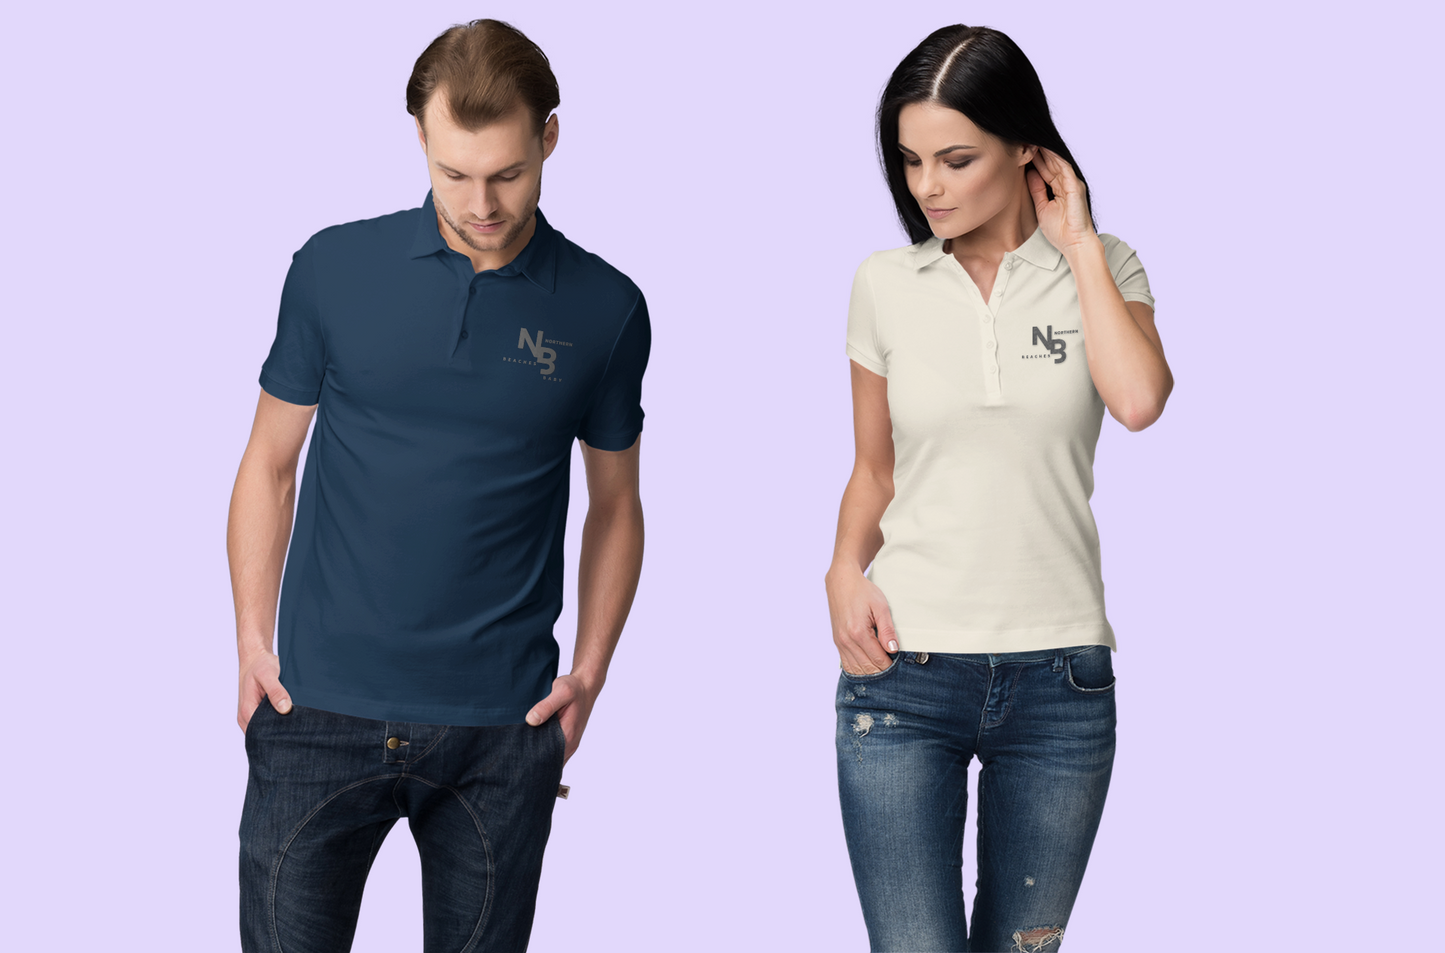 Cotton Polo Shirts Northern Beaches logos SALE ON NOW! Reduced to $35 until sold out!